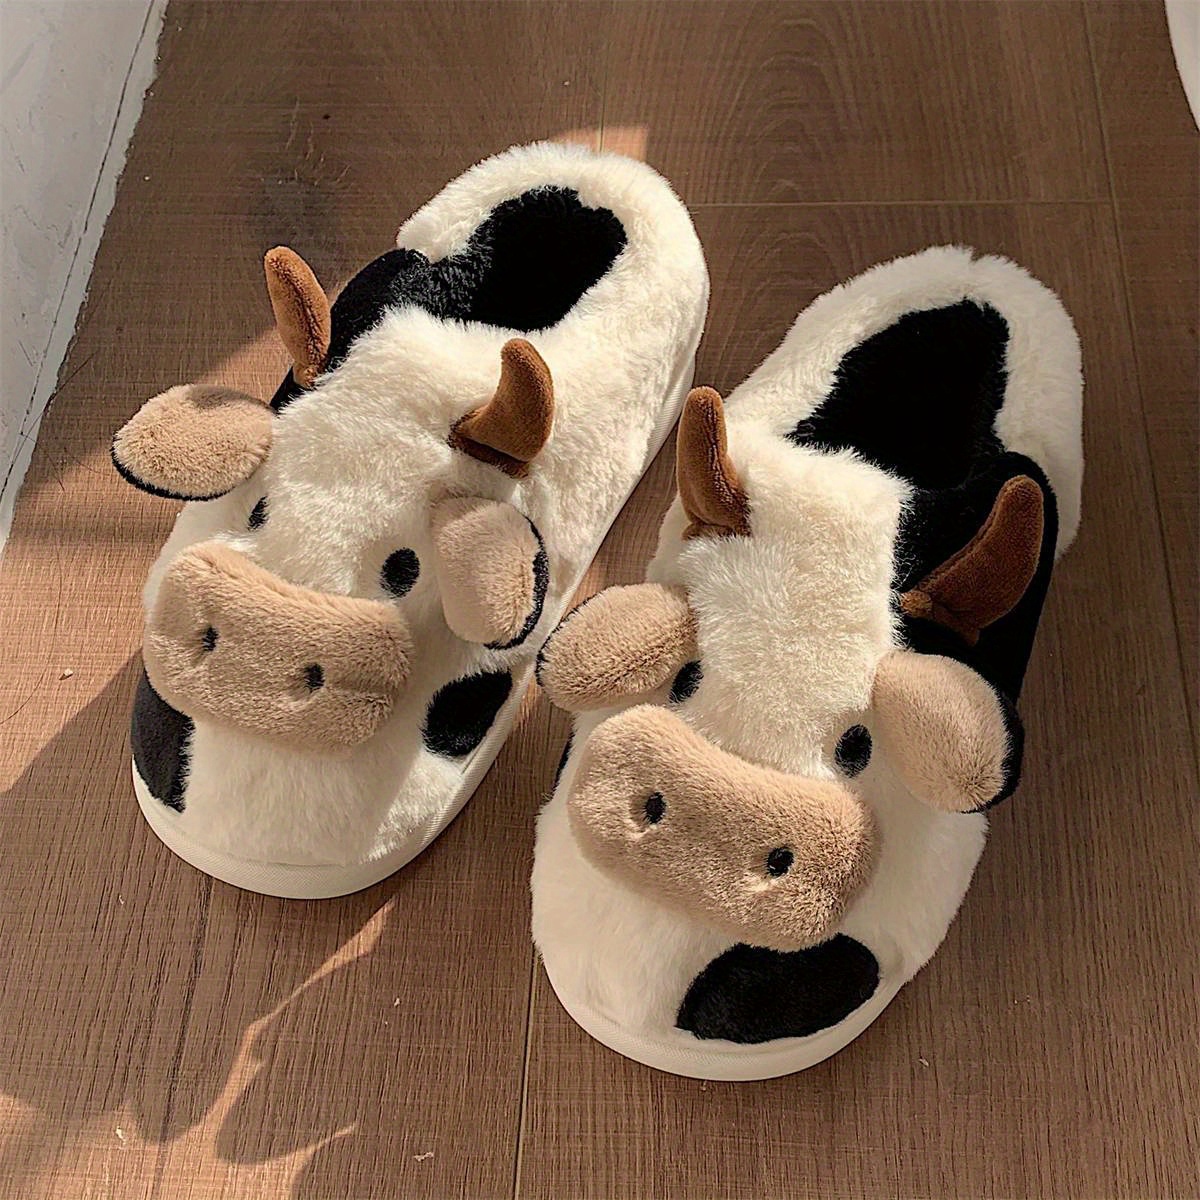 B/H Lined slippers,Winter men's and women's fruit non-slip plush slippers,  home cute couple thick-soled cotton shoes-coffee_UK7.5-UK8.5,Slipper Warm  Indoor Slippers Bedroom Slippers : Amazon.co.uk: Fashion